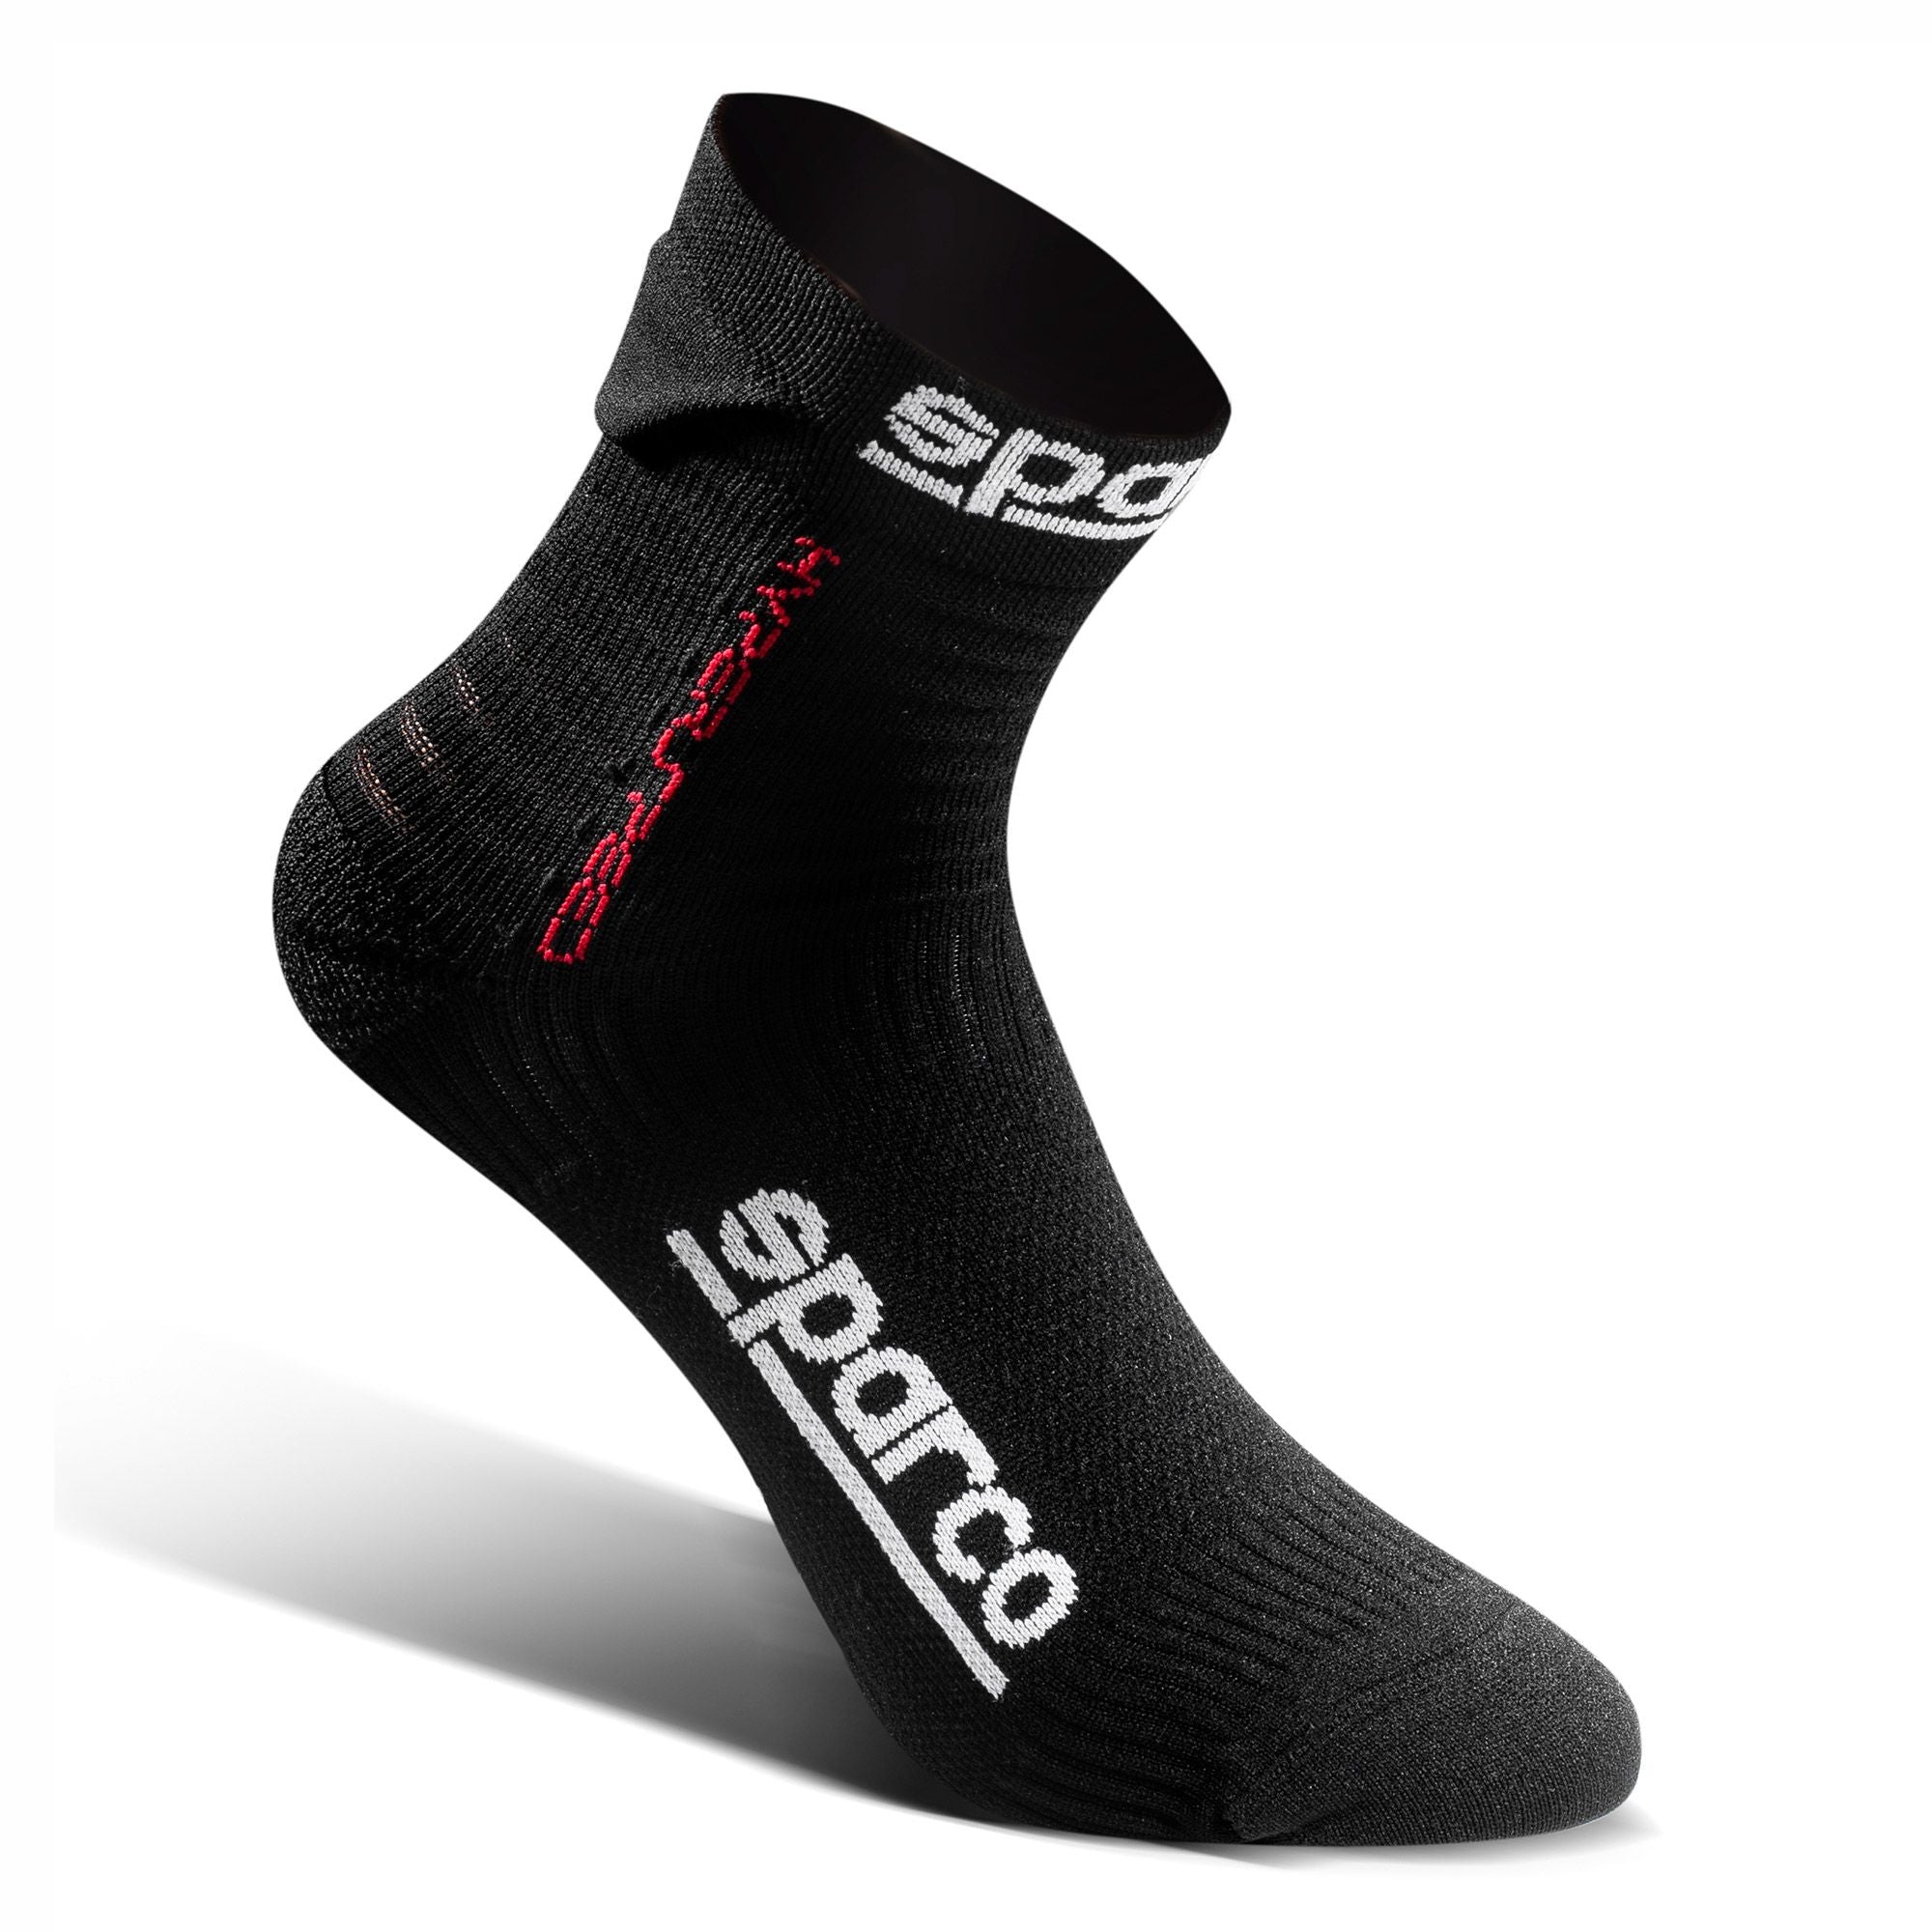 SPARCO 01290NR4243 Driving socks HYPERSPEED, black, size 42/43 Photo-0 